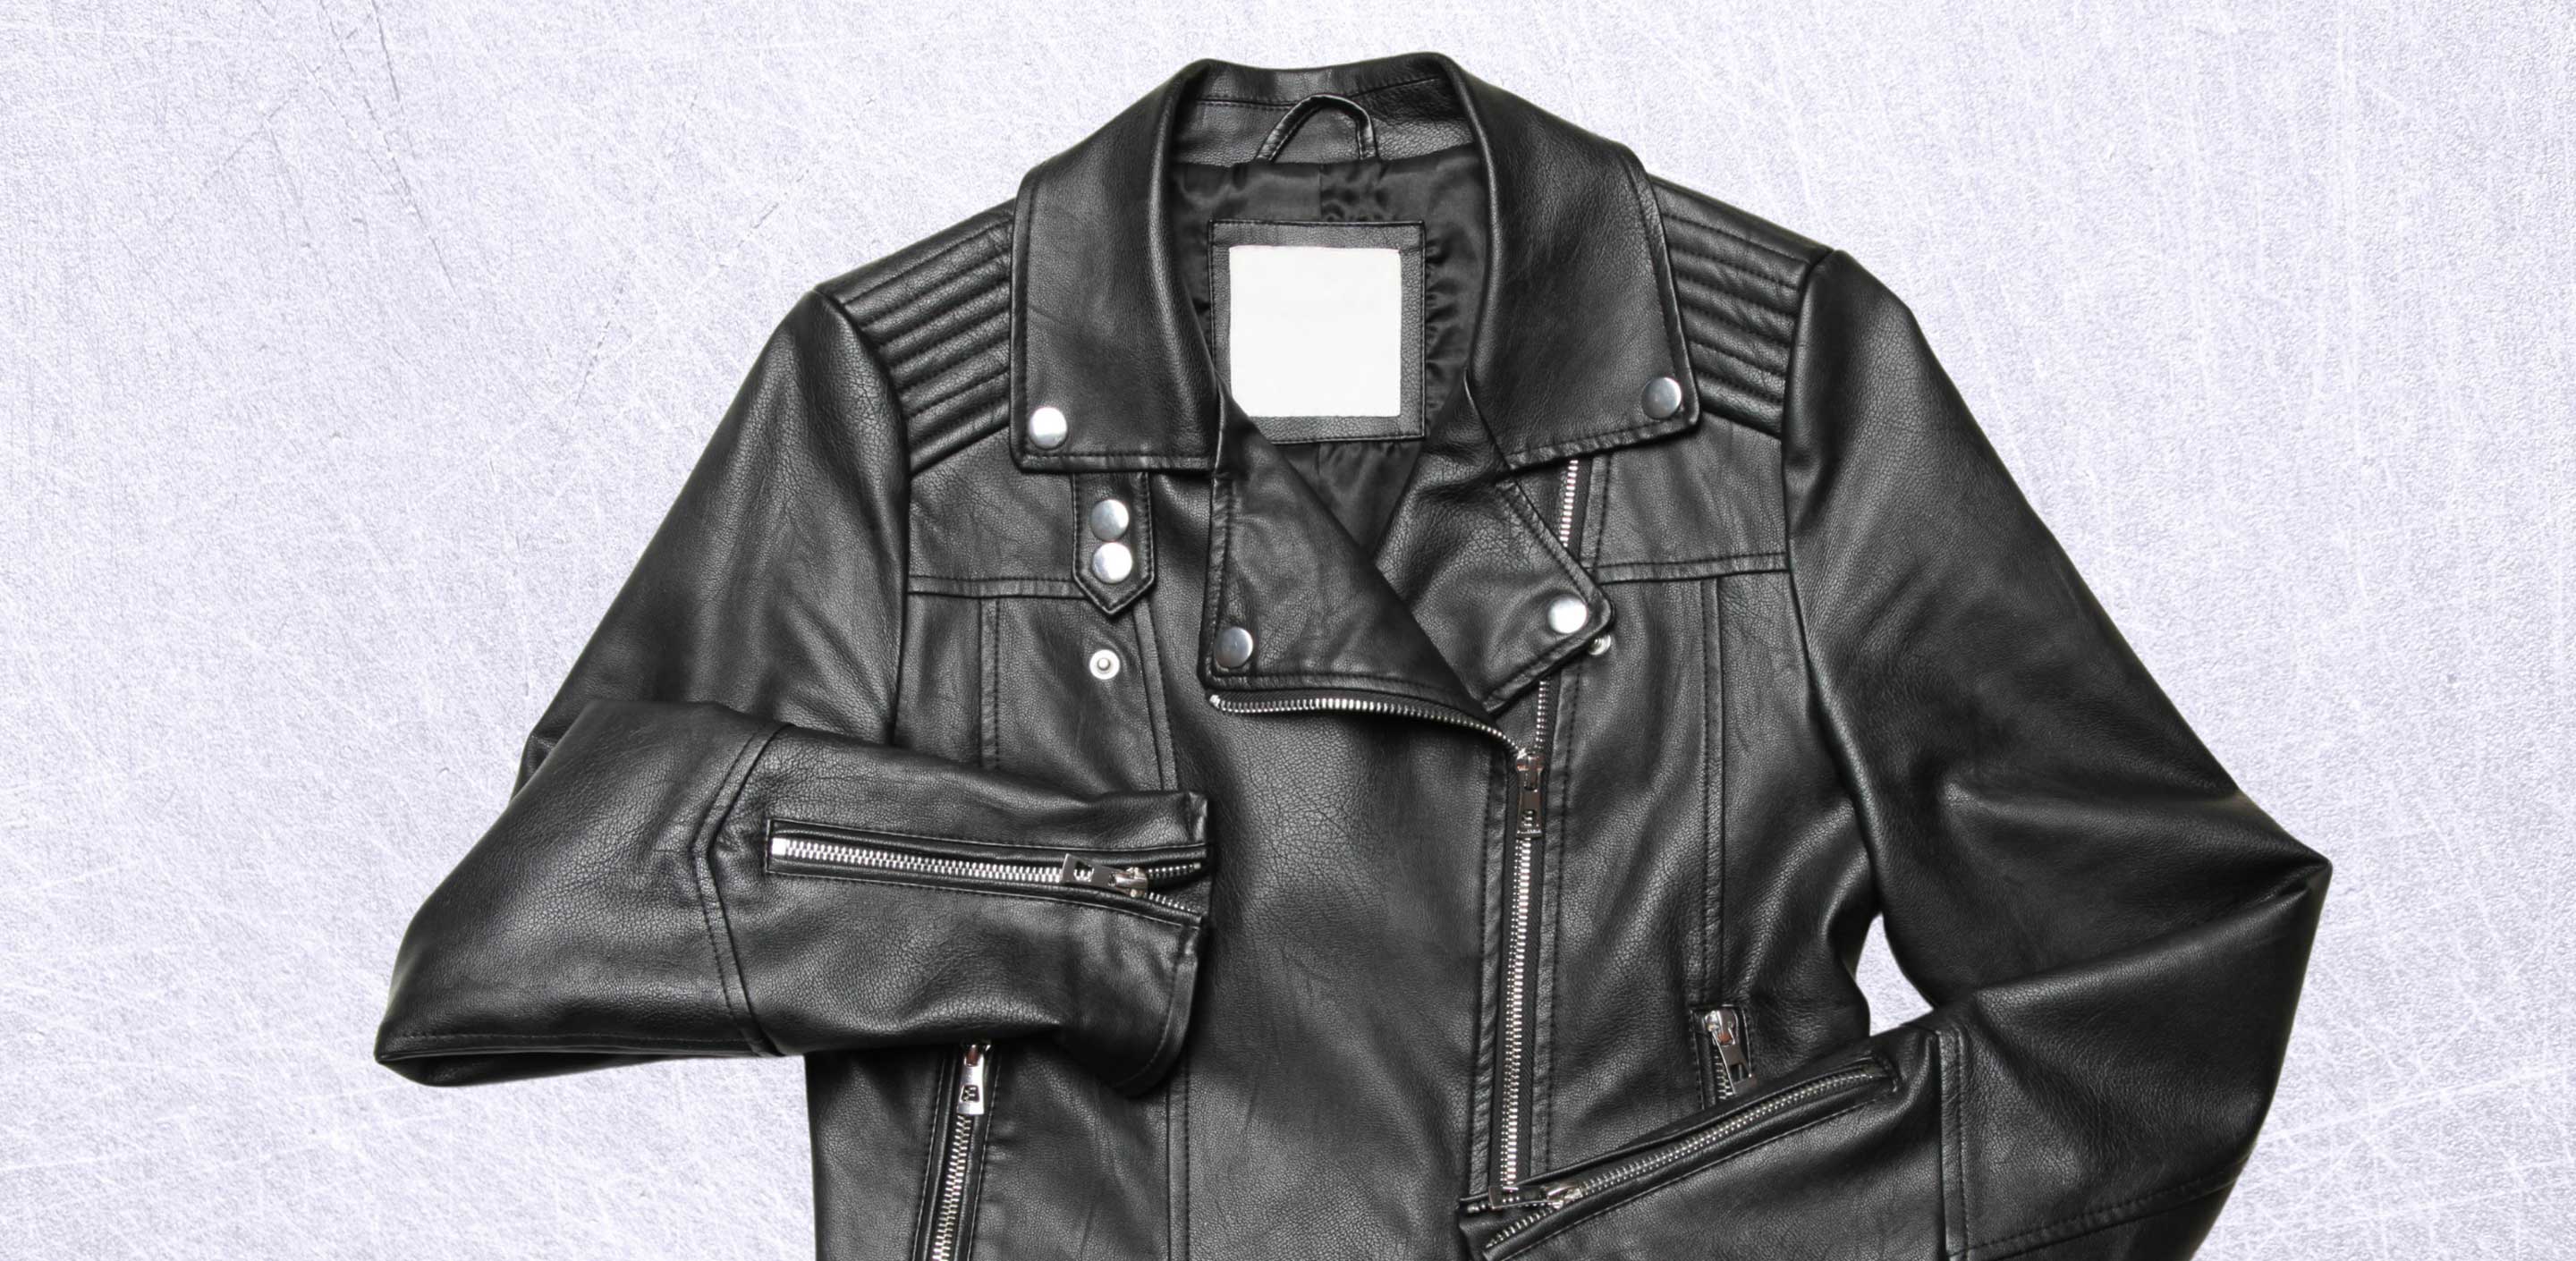 Storing Your Leather Jacket for Future Wear